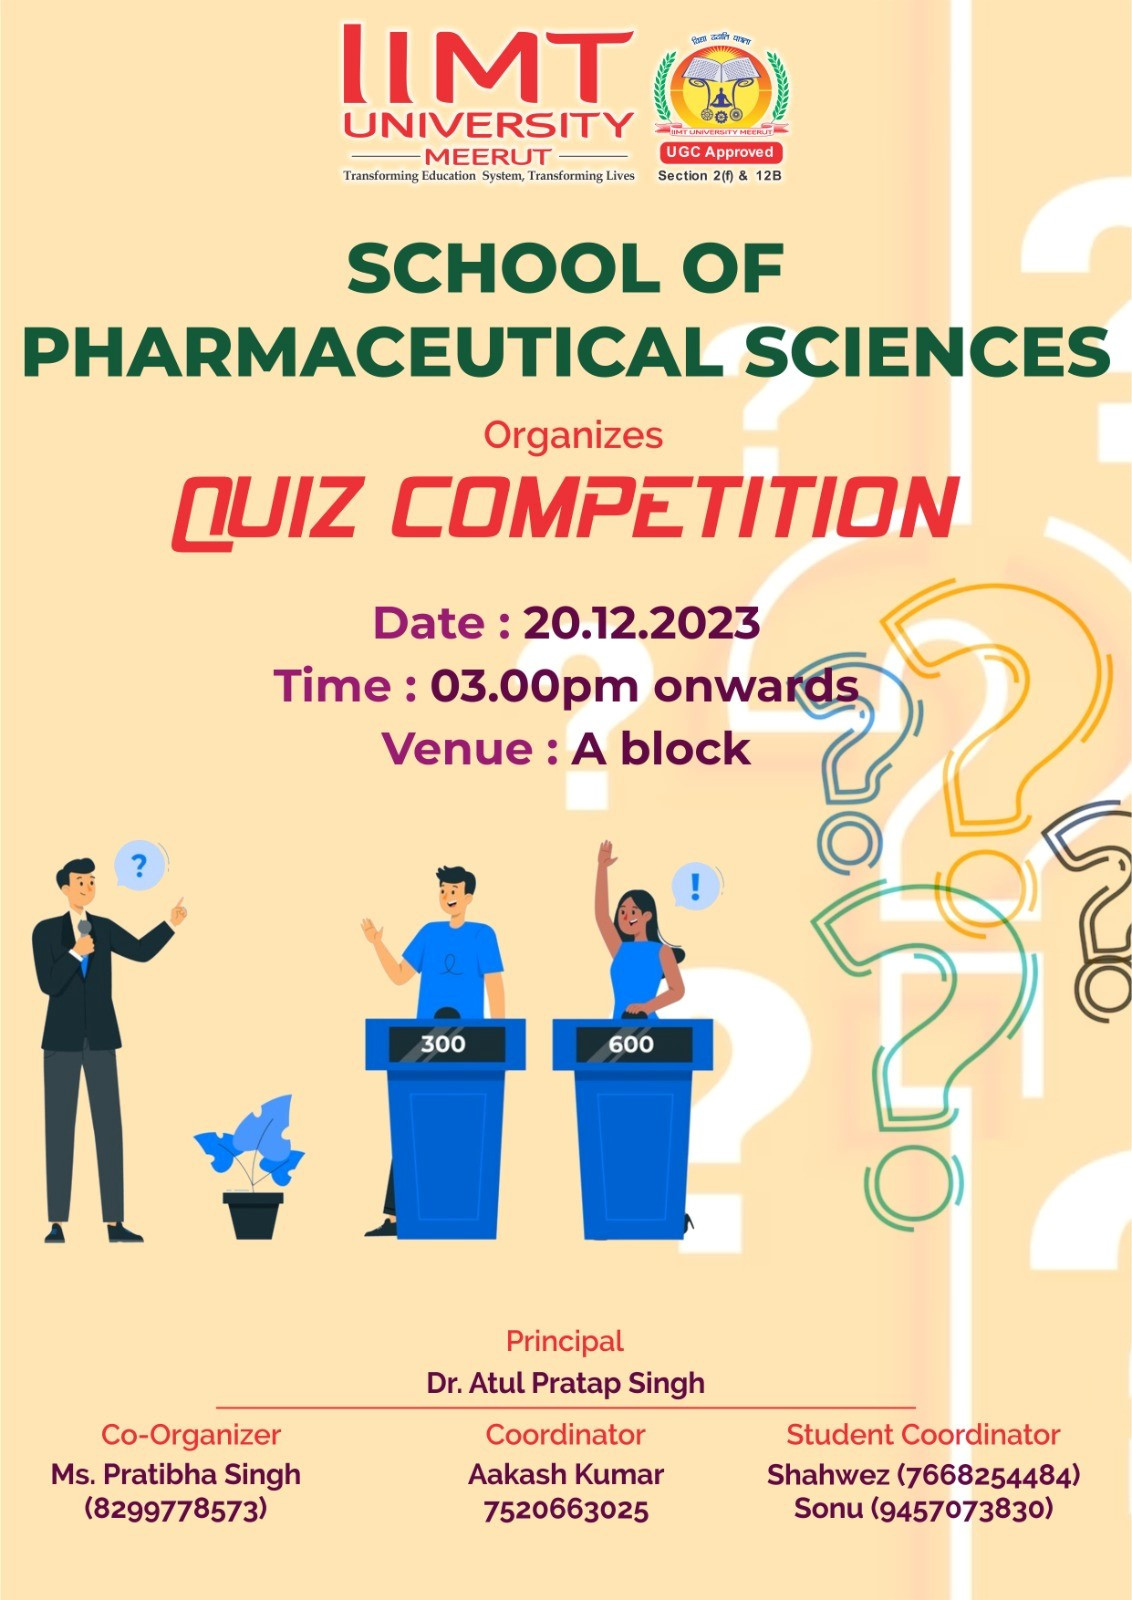 Discover Academic Excellence: SoPS IIMT University, Meerut Hosts Thrilling Pharmaceutical Quiz Competition